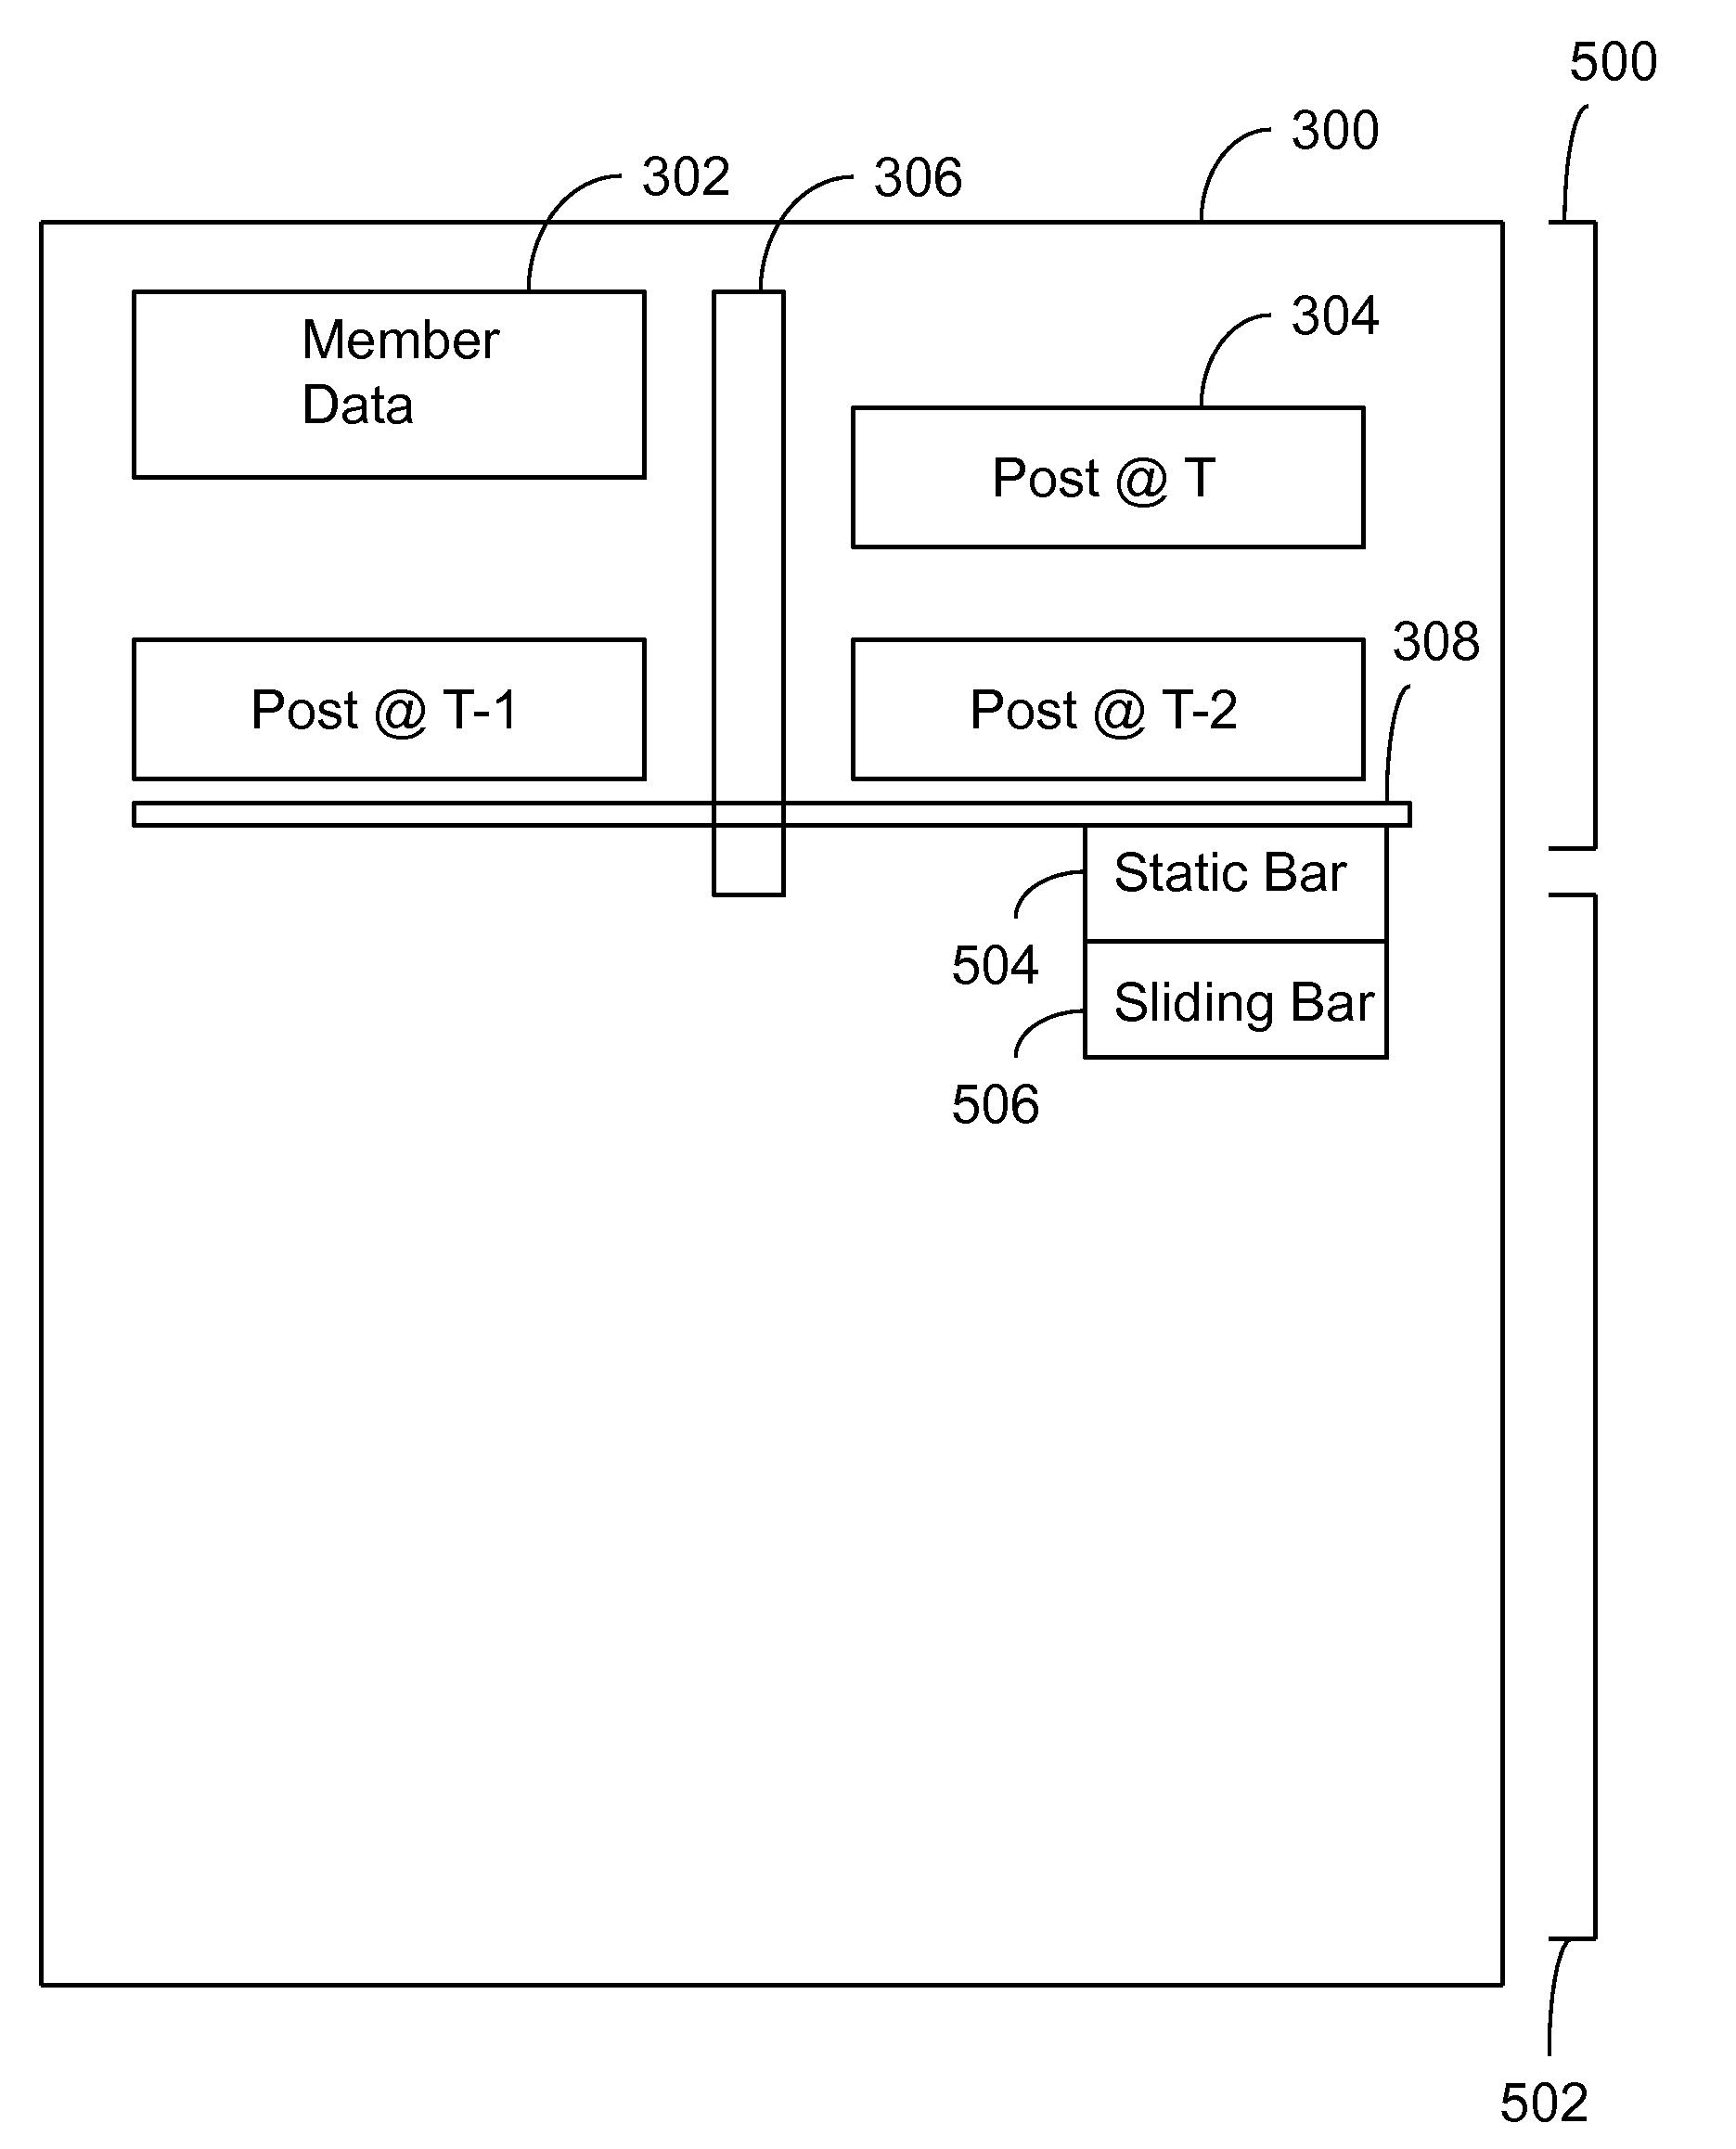 Apparatus and method for single action control of social network profile access